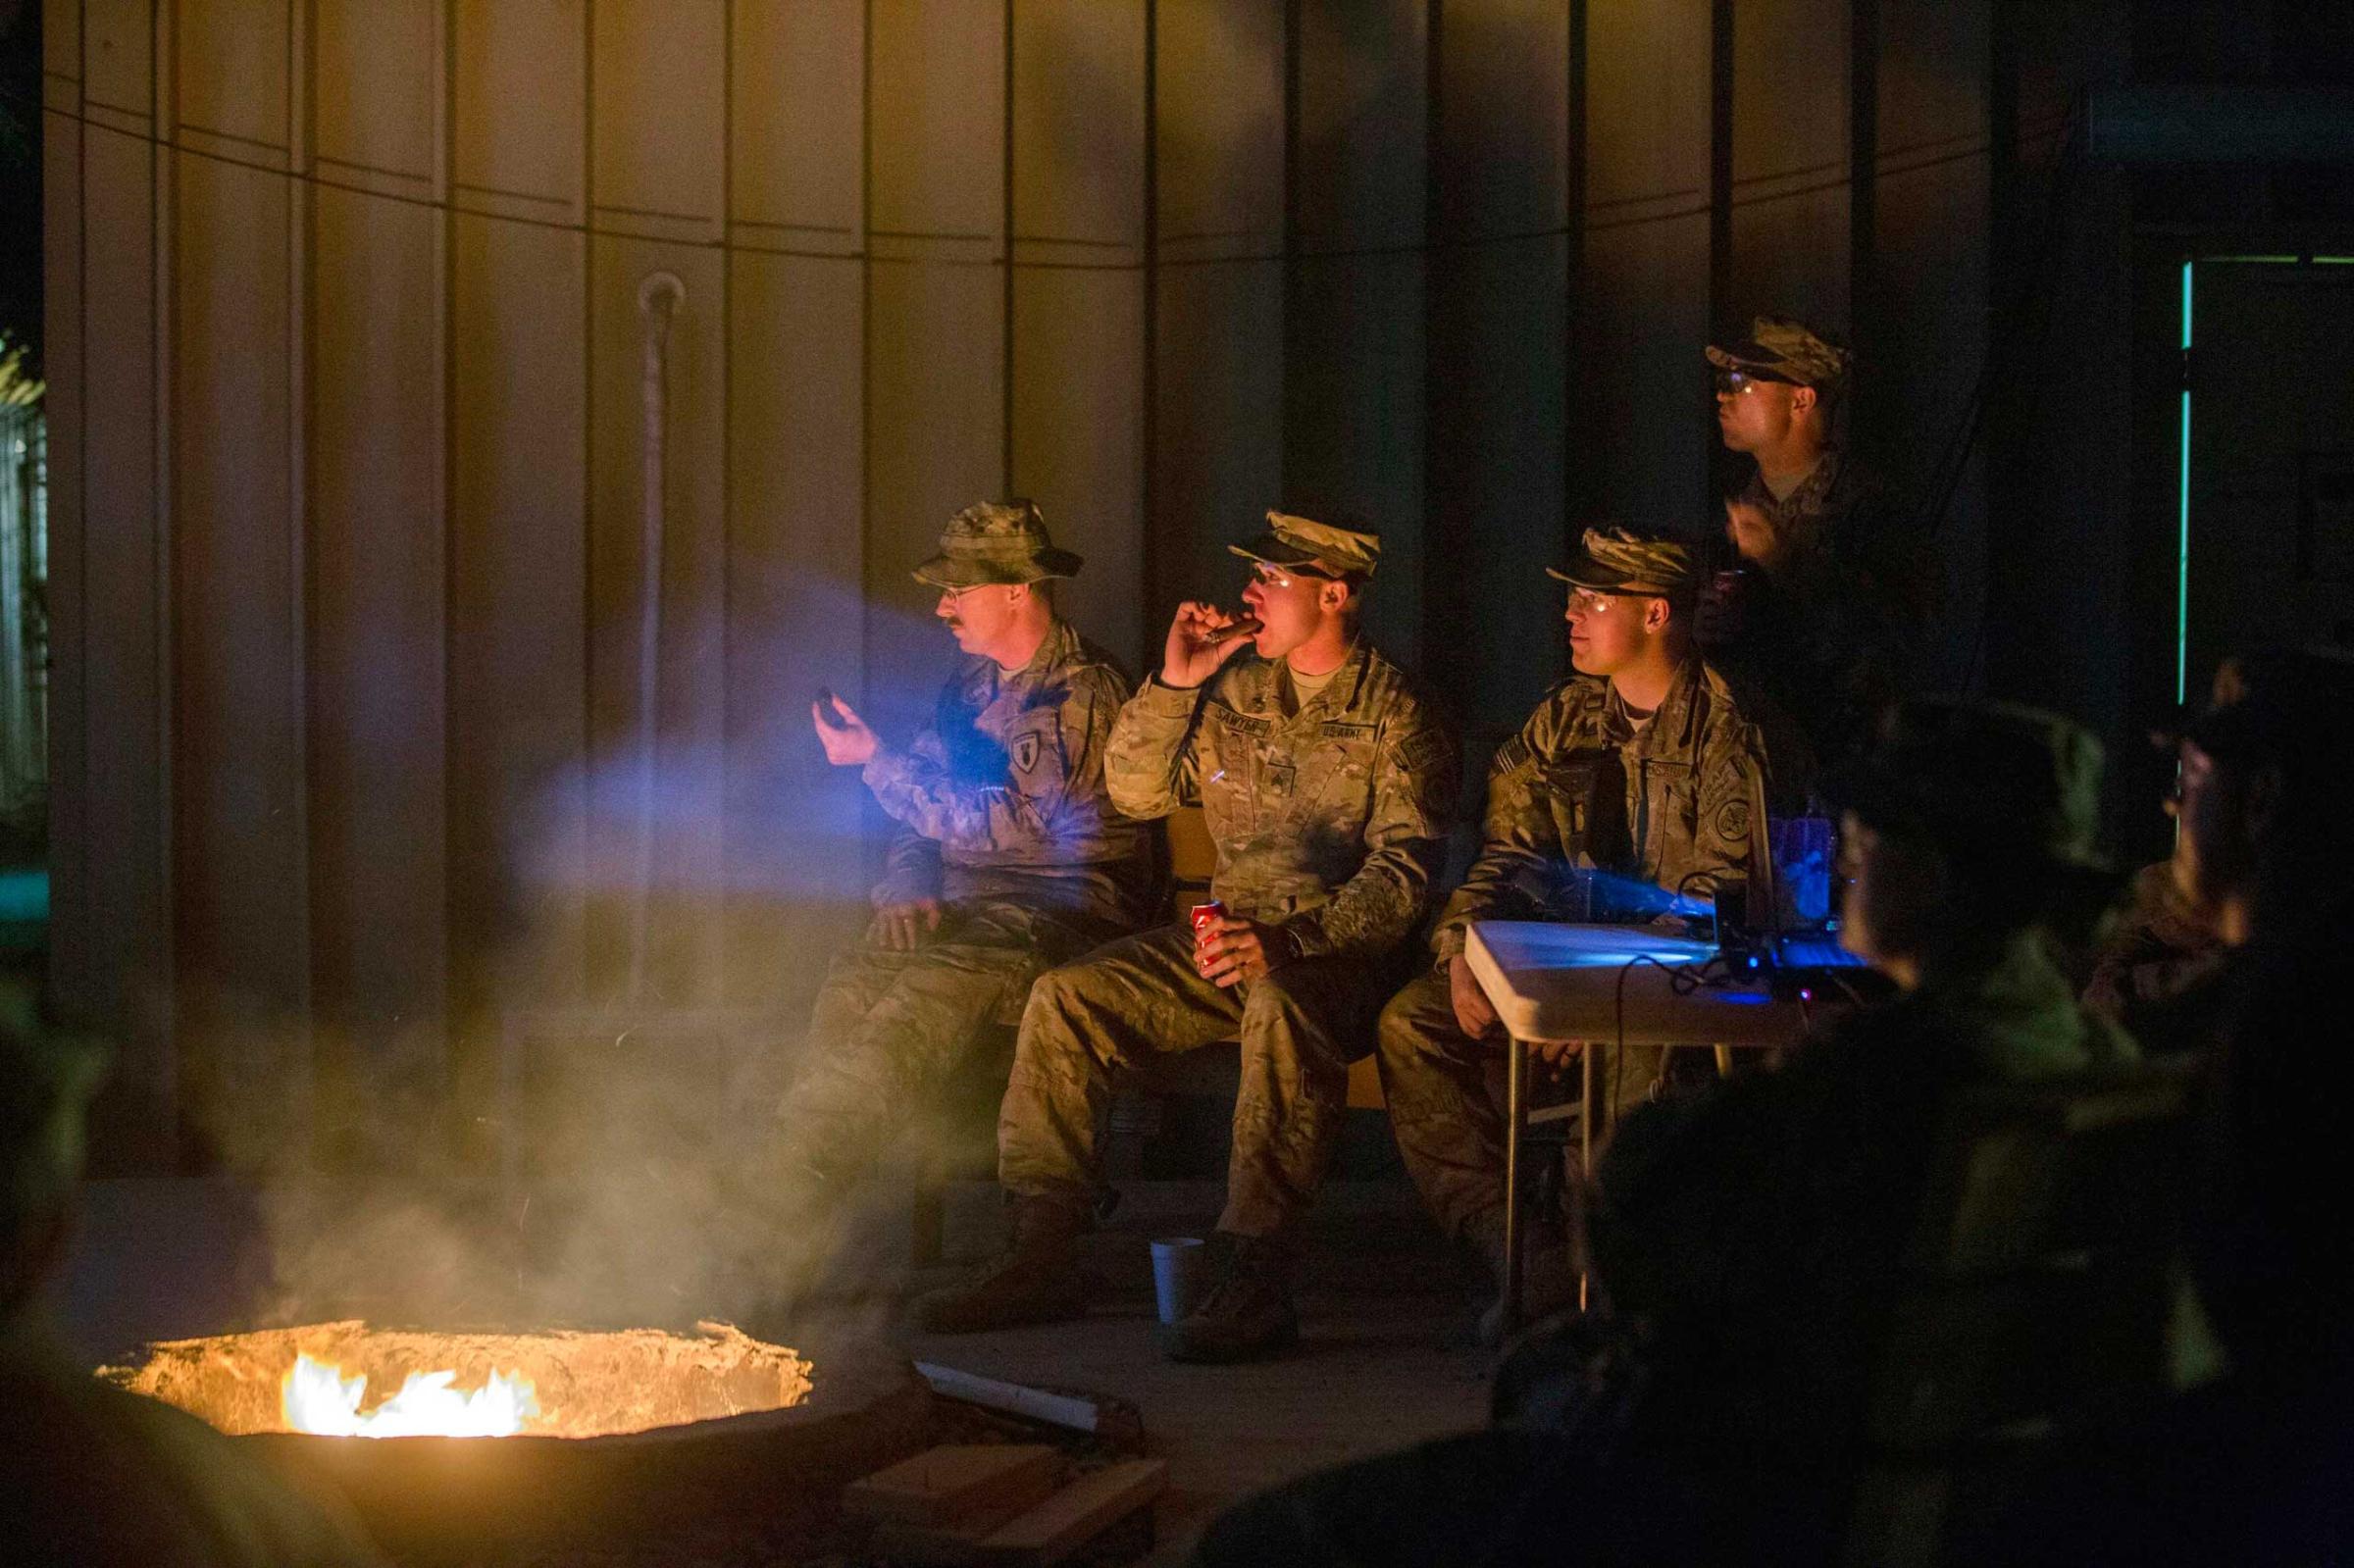 U.S. soldiers from the 3rd Cavalry Regiment watch "Die Hard" projected onto an outdoor wall as part of Christmas Day celebrations on forward operating base Gamberi in the Laghman province of Afghanistan